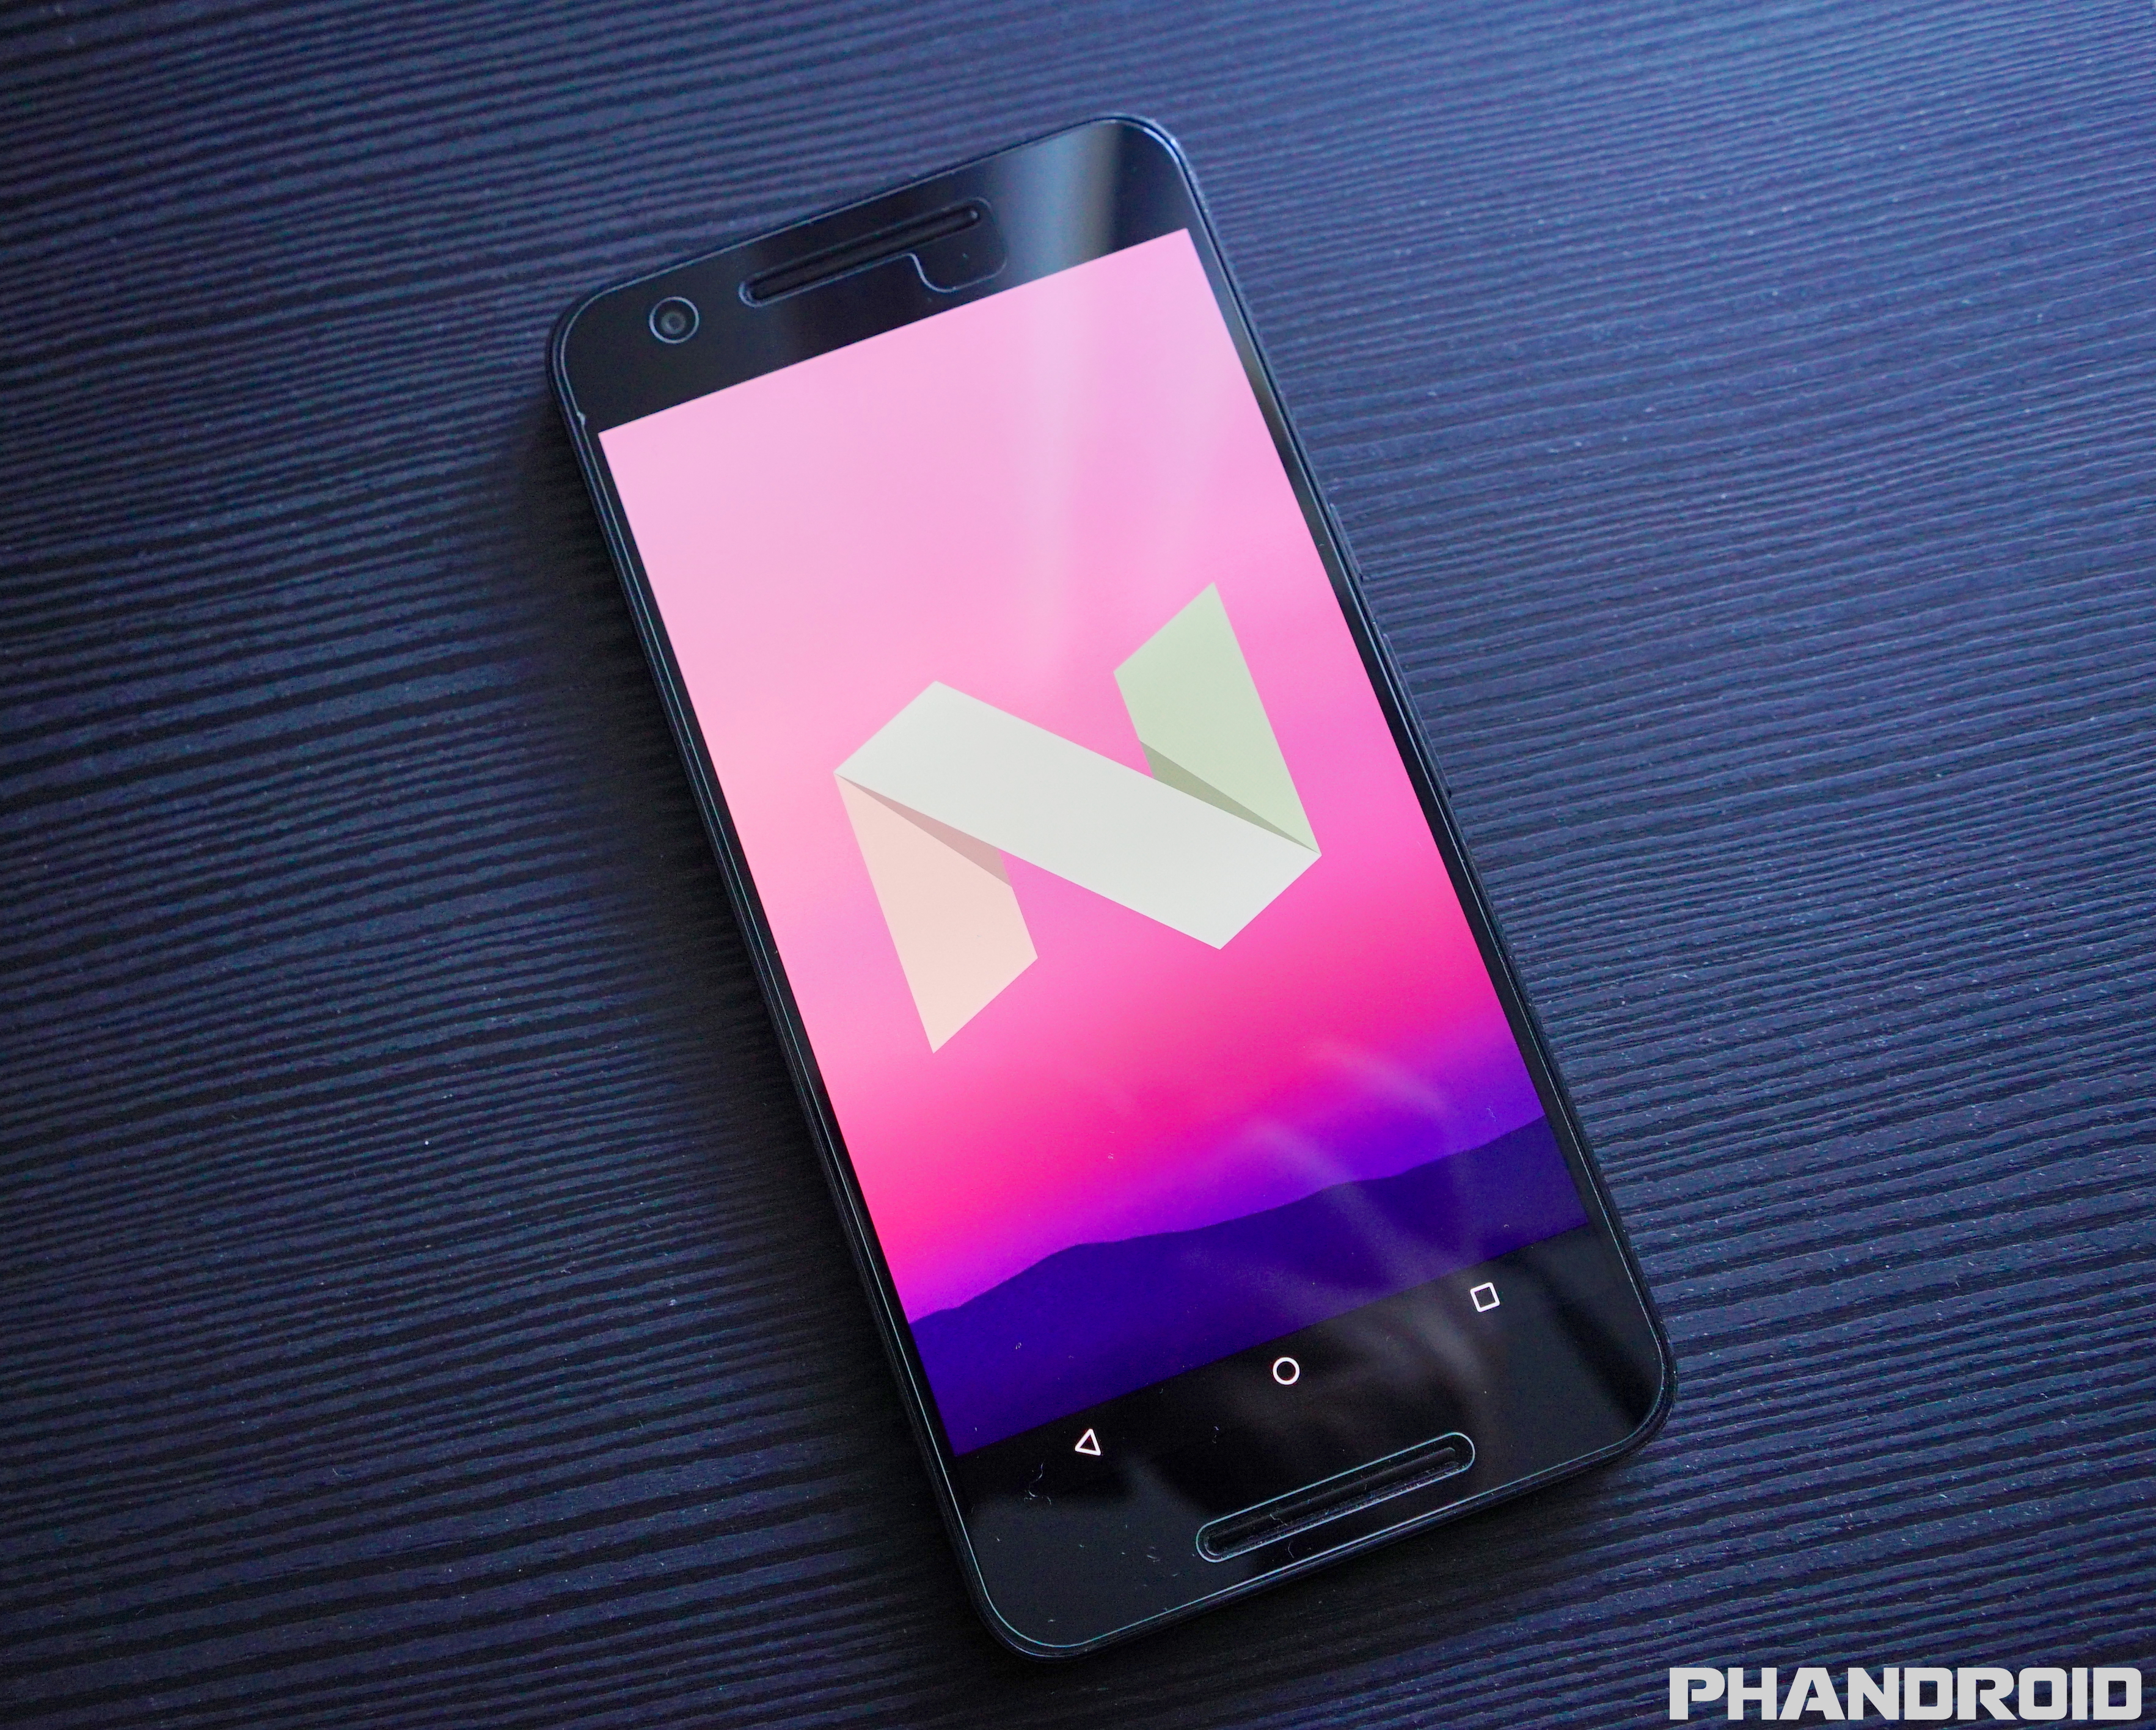 Android 7 1 1 Nougat Will Be Released On December 6th Phandroid